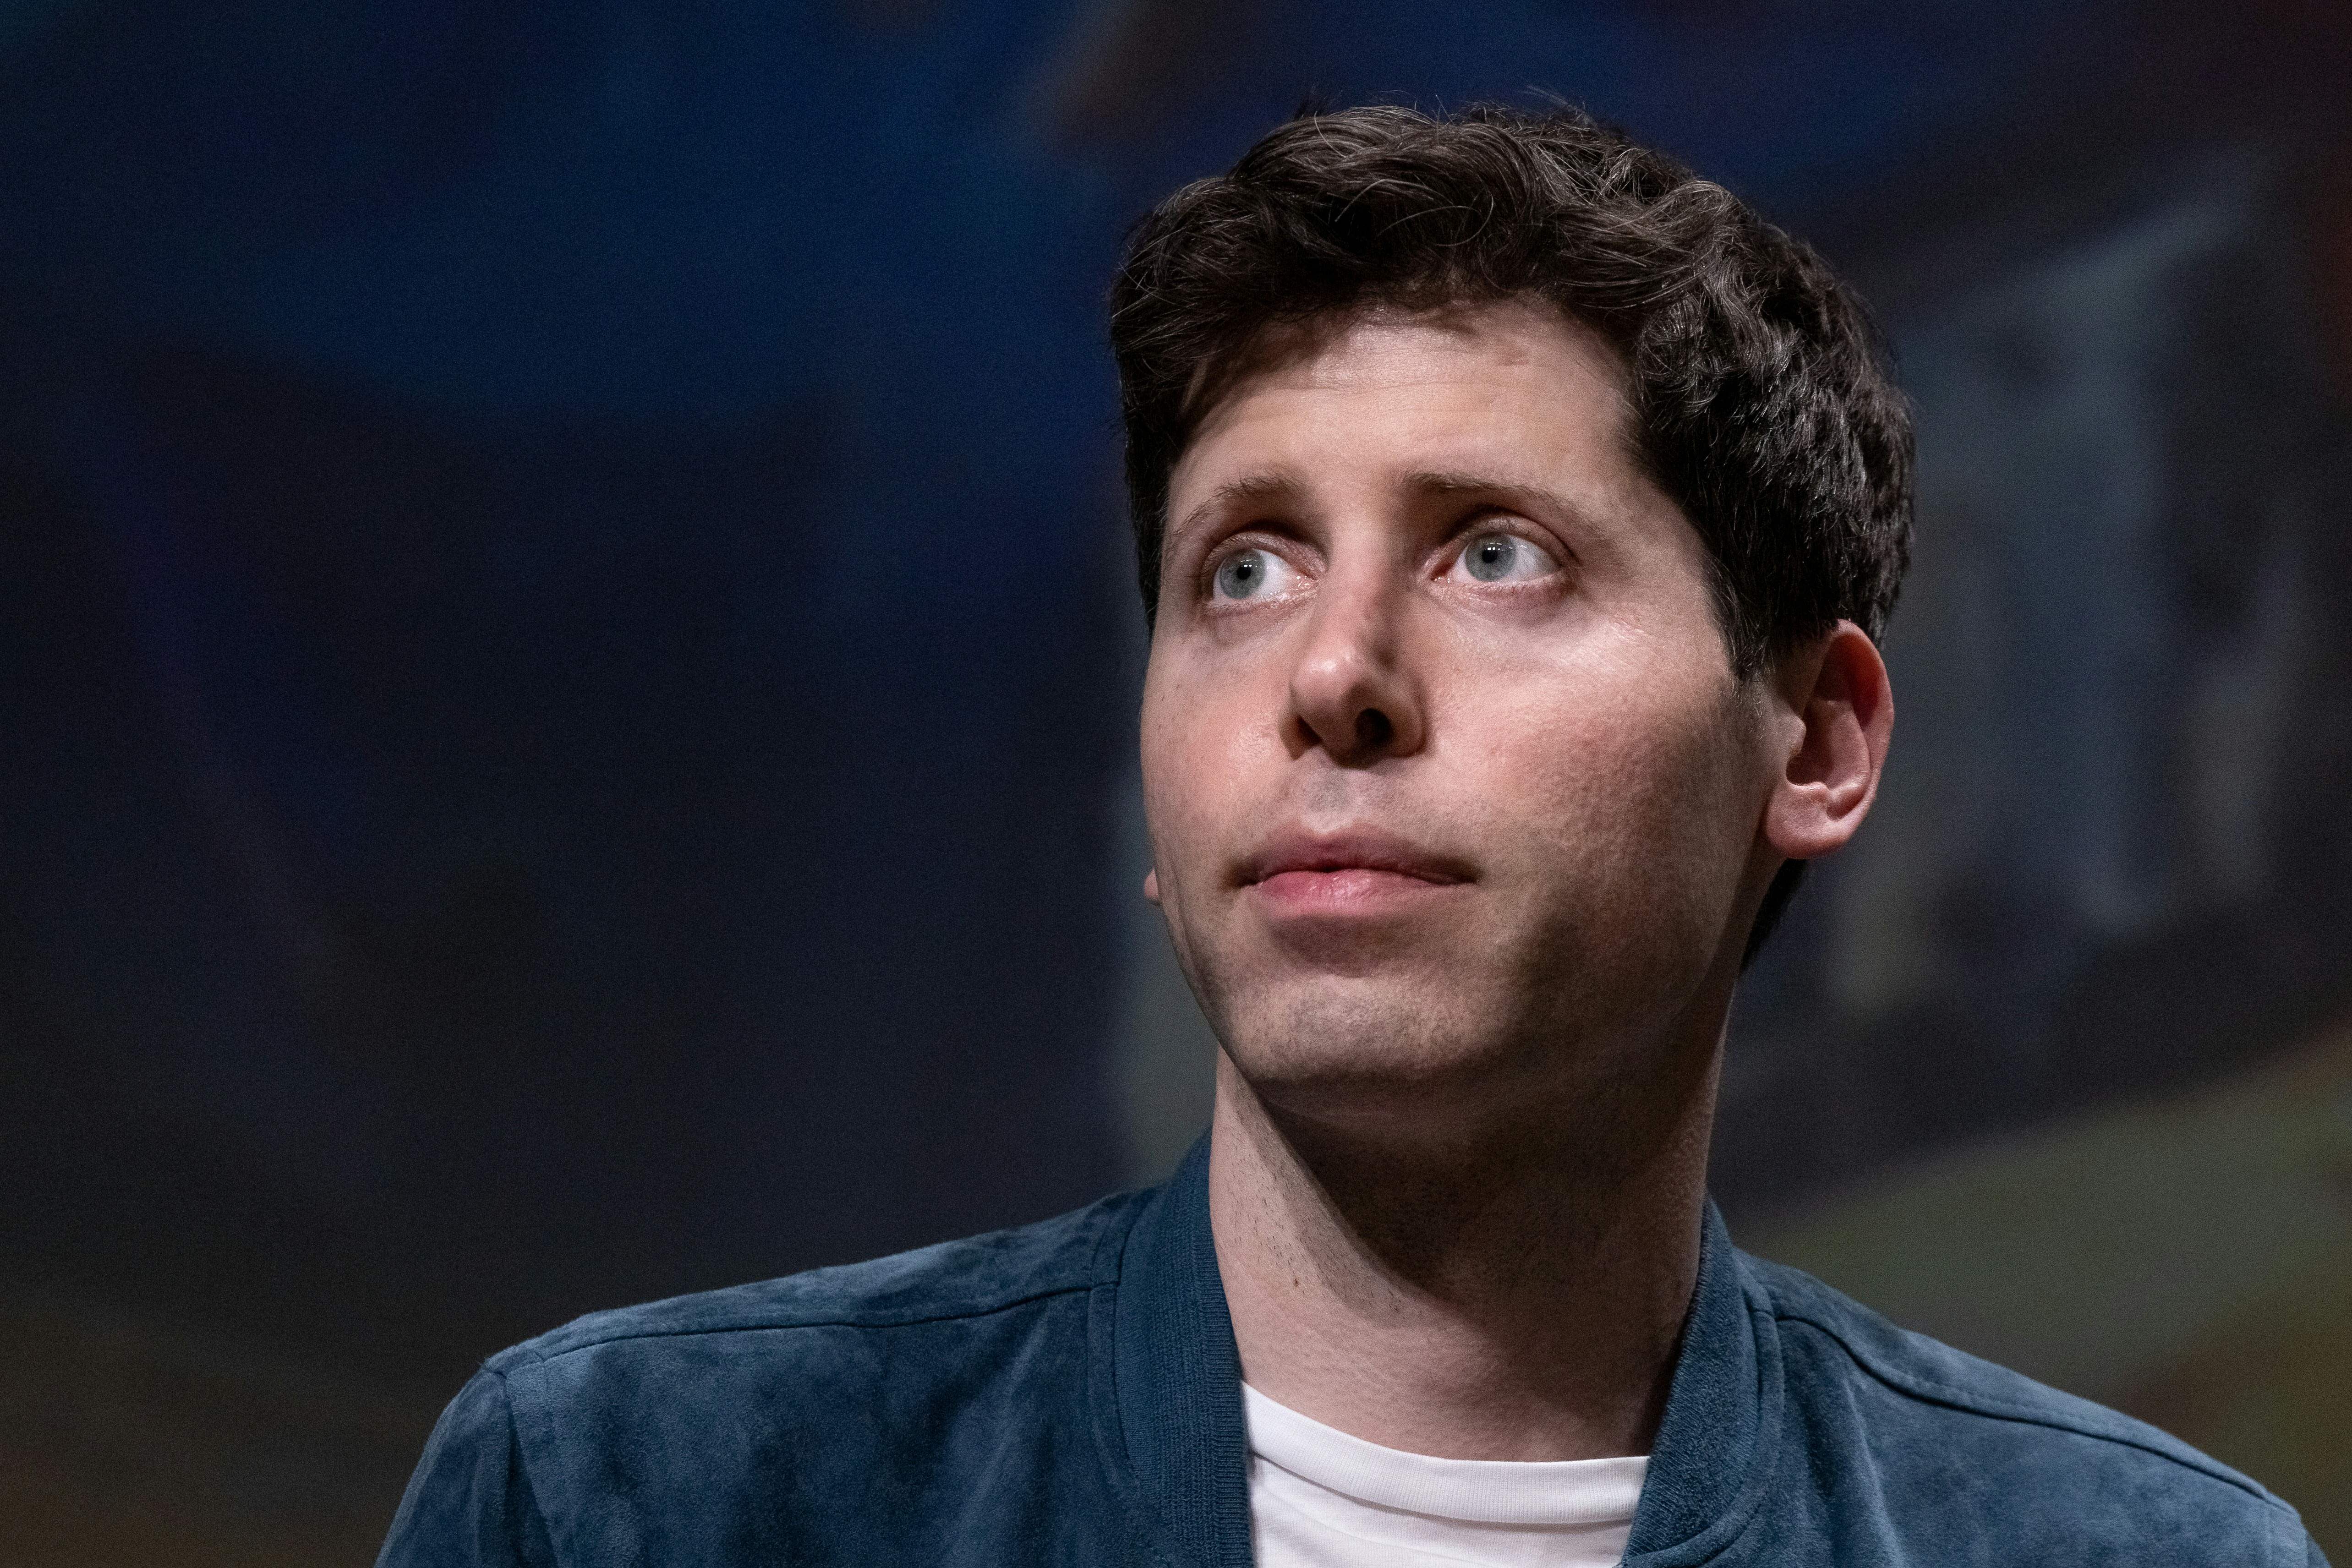 A Sam Altman-Backed Group Studied Universal Basic Income For 3 Years. Here’s What They Found.